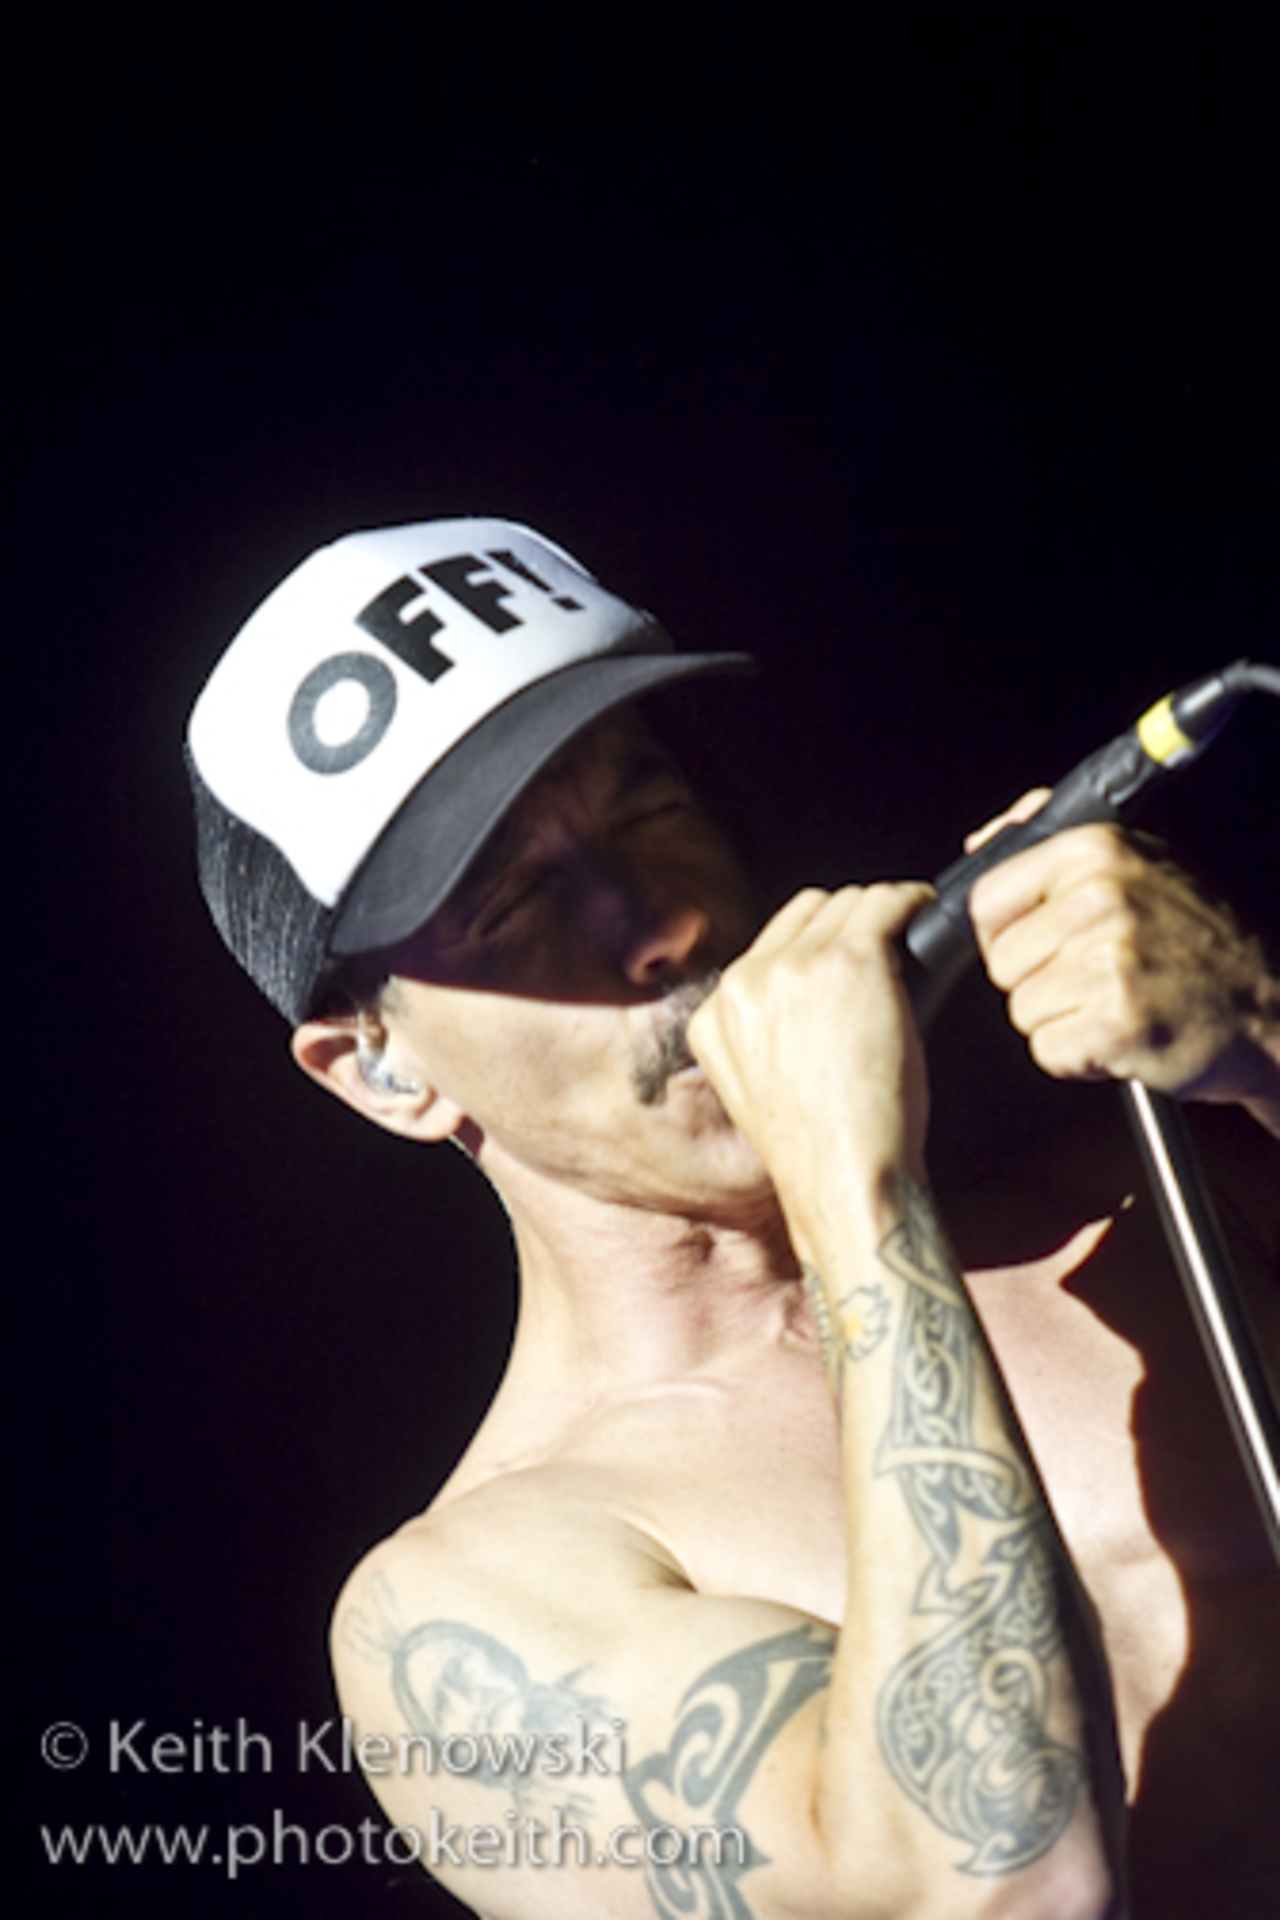 Red Hot Chili Peppers at Riverbend Music Center